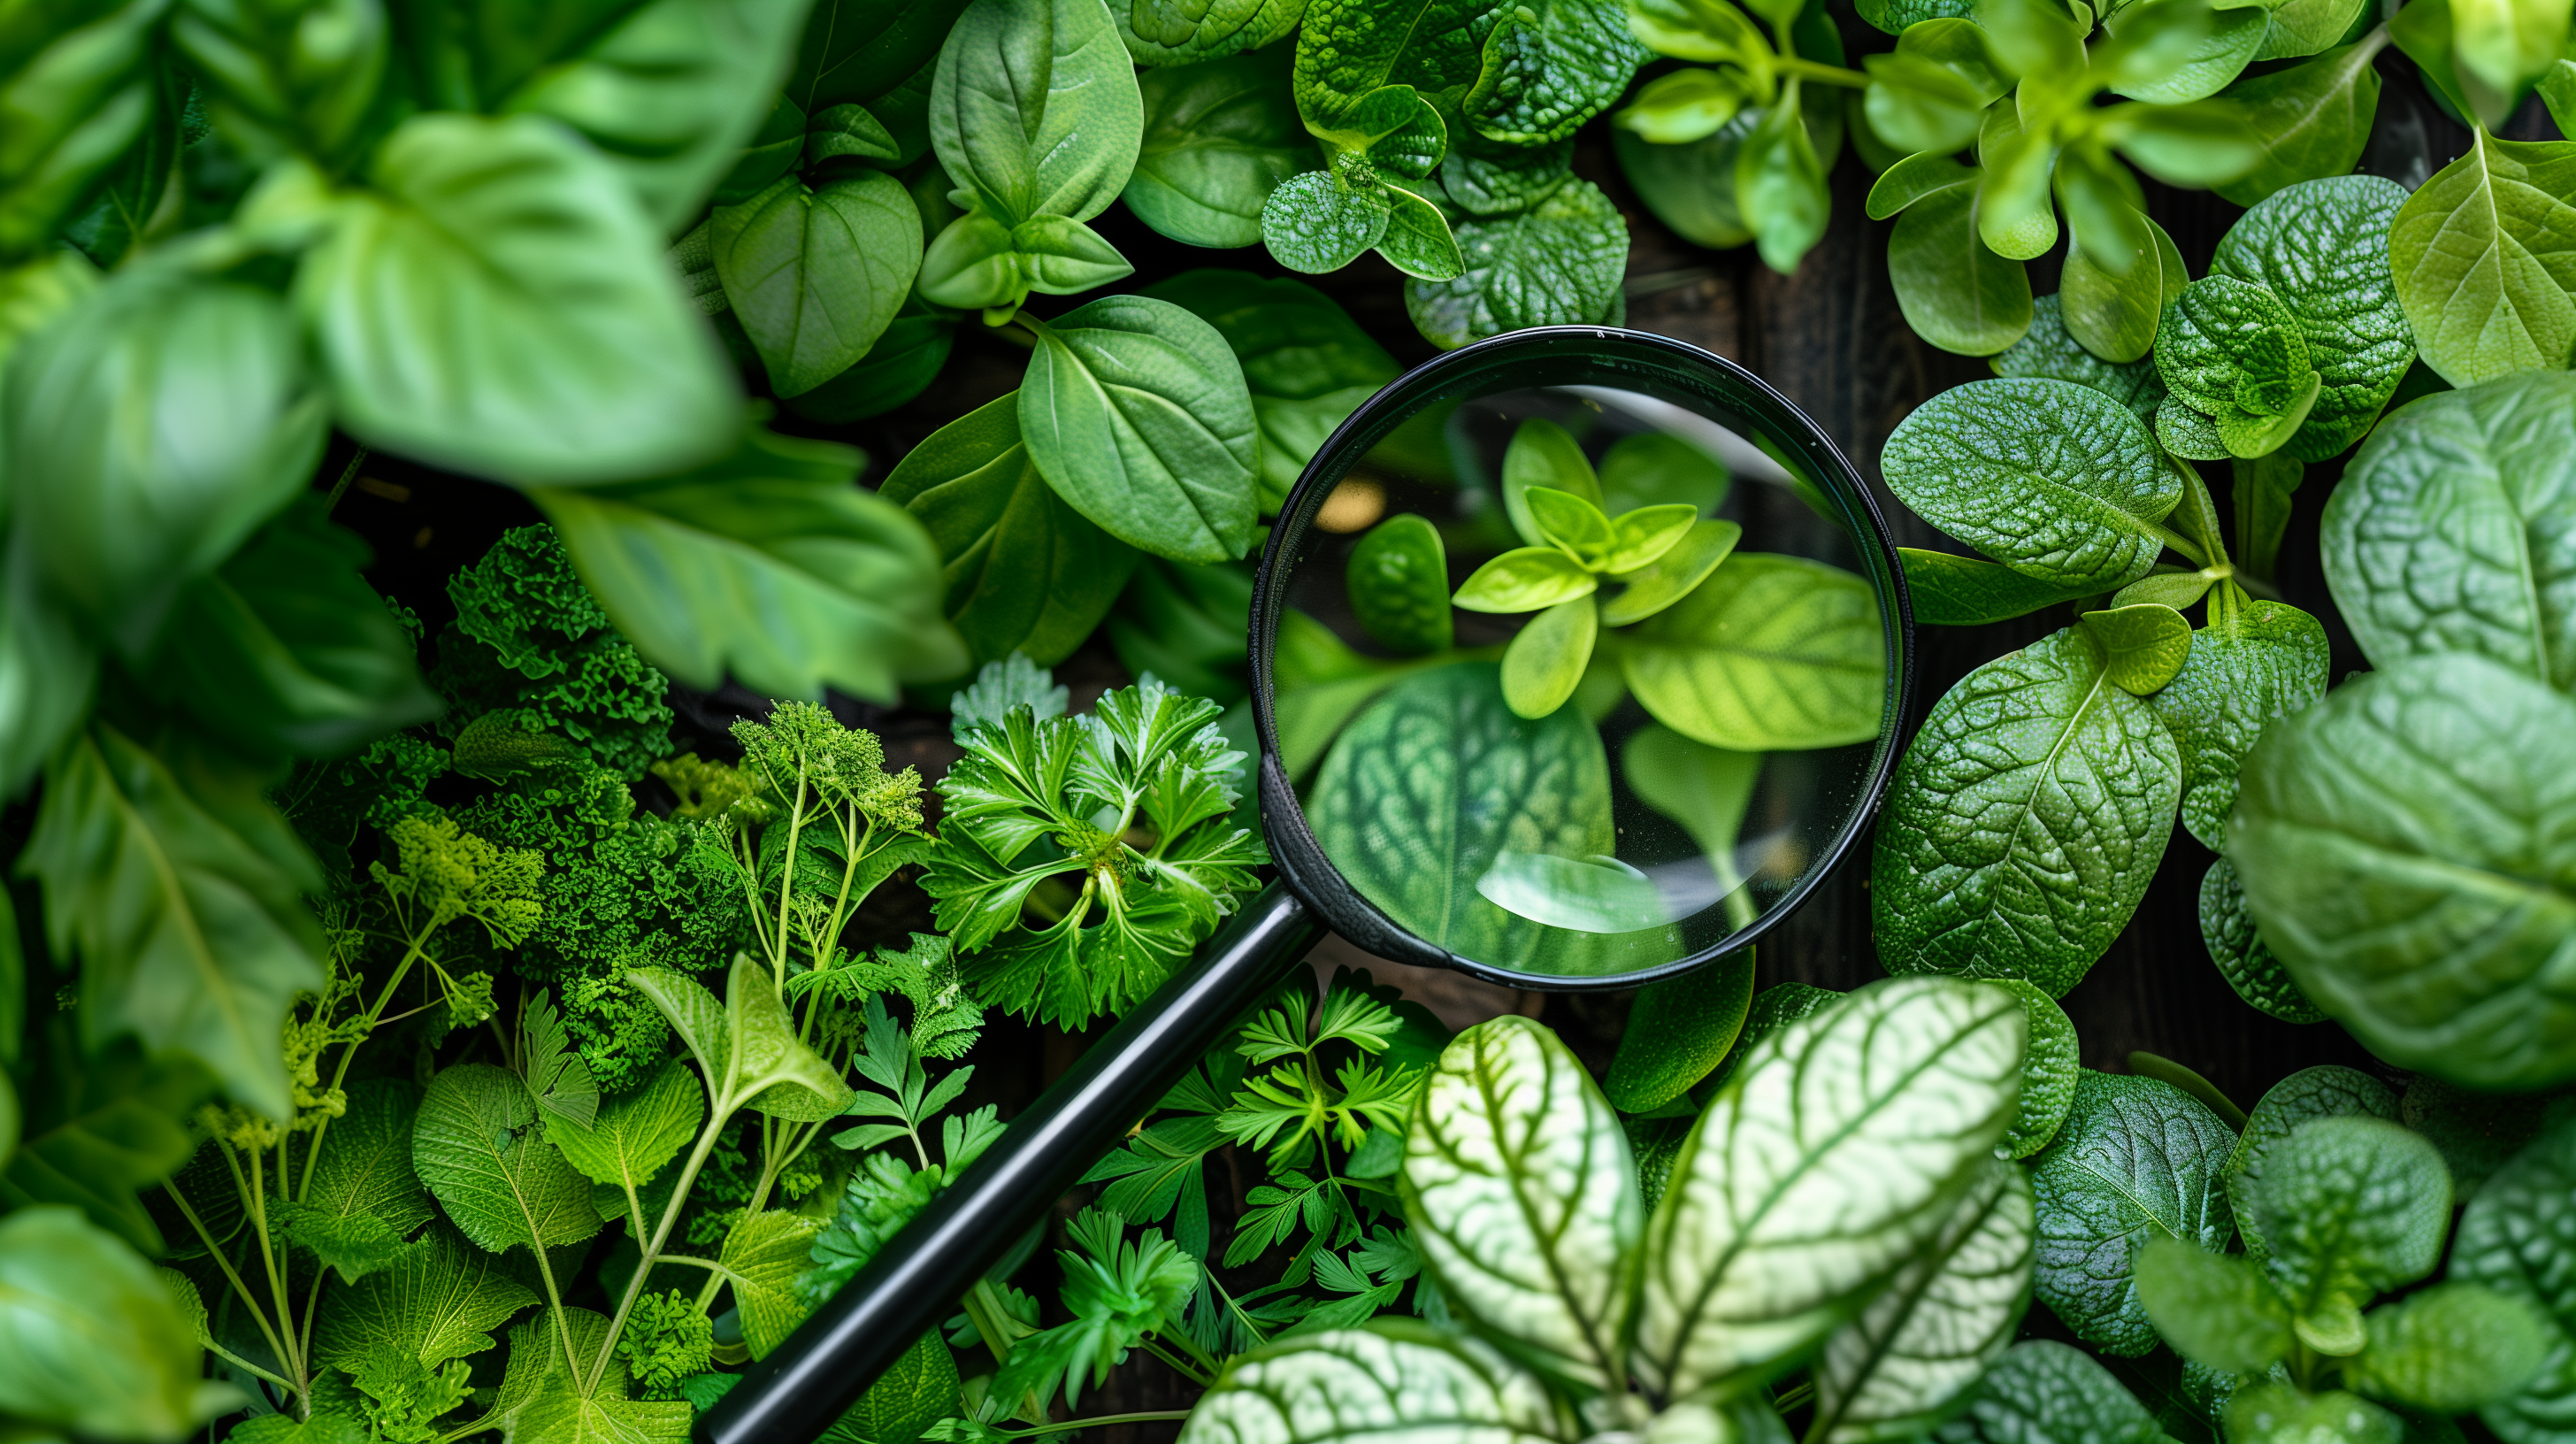 lush green plants versus dull, wilted ones, with a magnifying glass focusing on the unhealthy plants